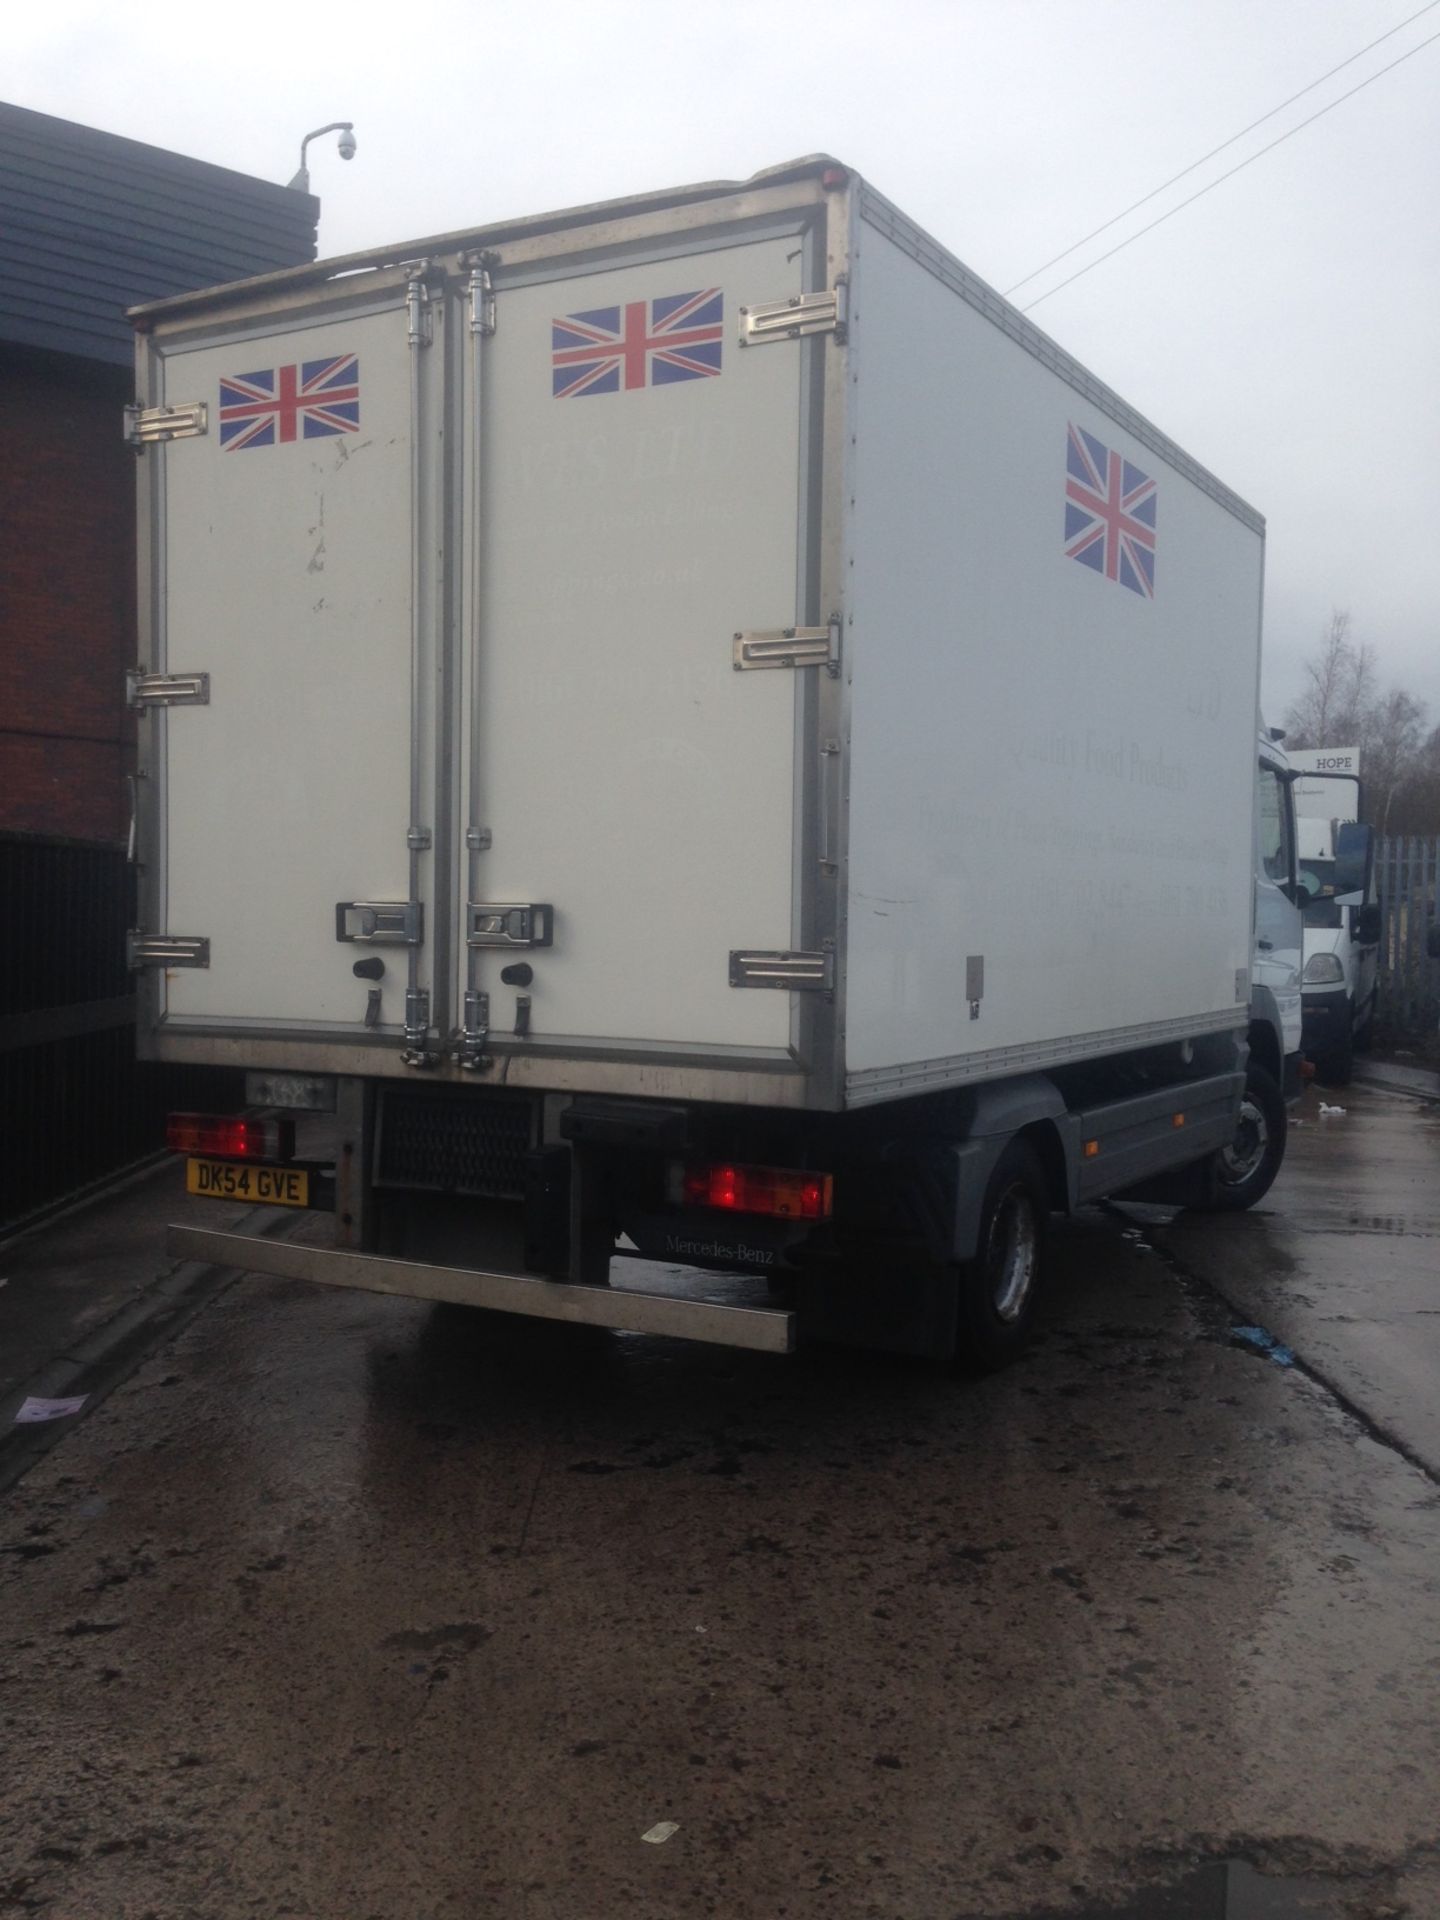 2004 54 MERCEDES ATEGO 815 REFRIGERATED 7.5 TON TRUCK - Image 3 of 5